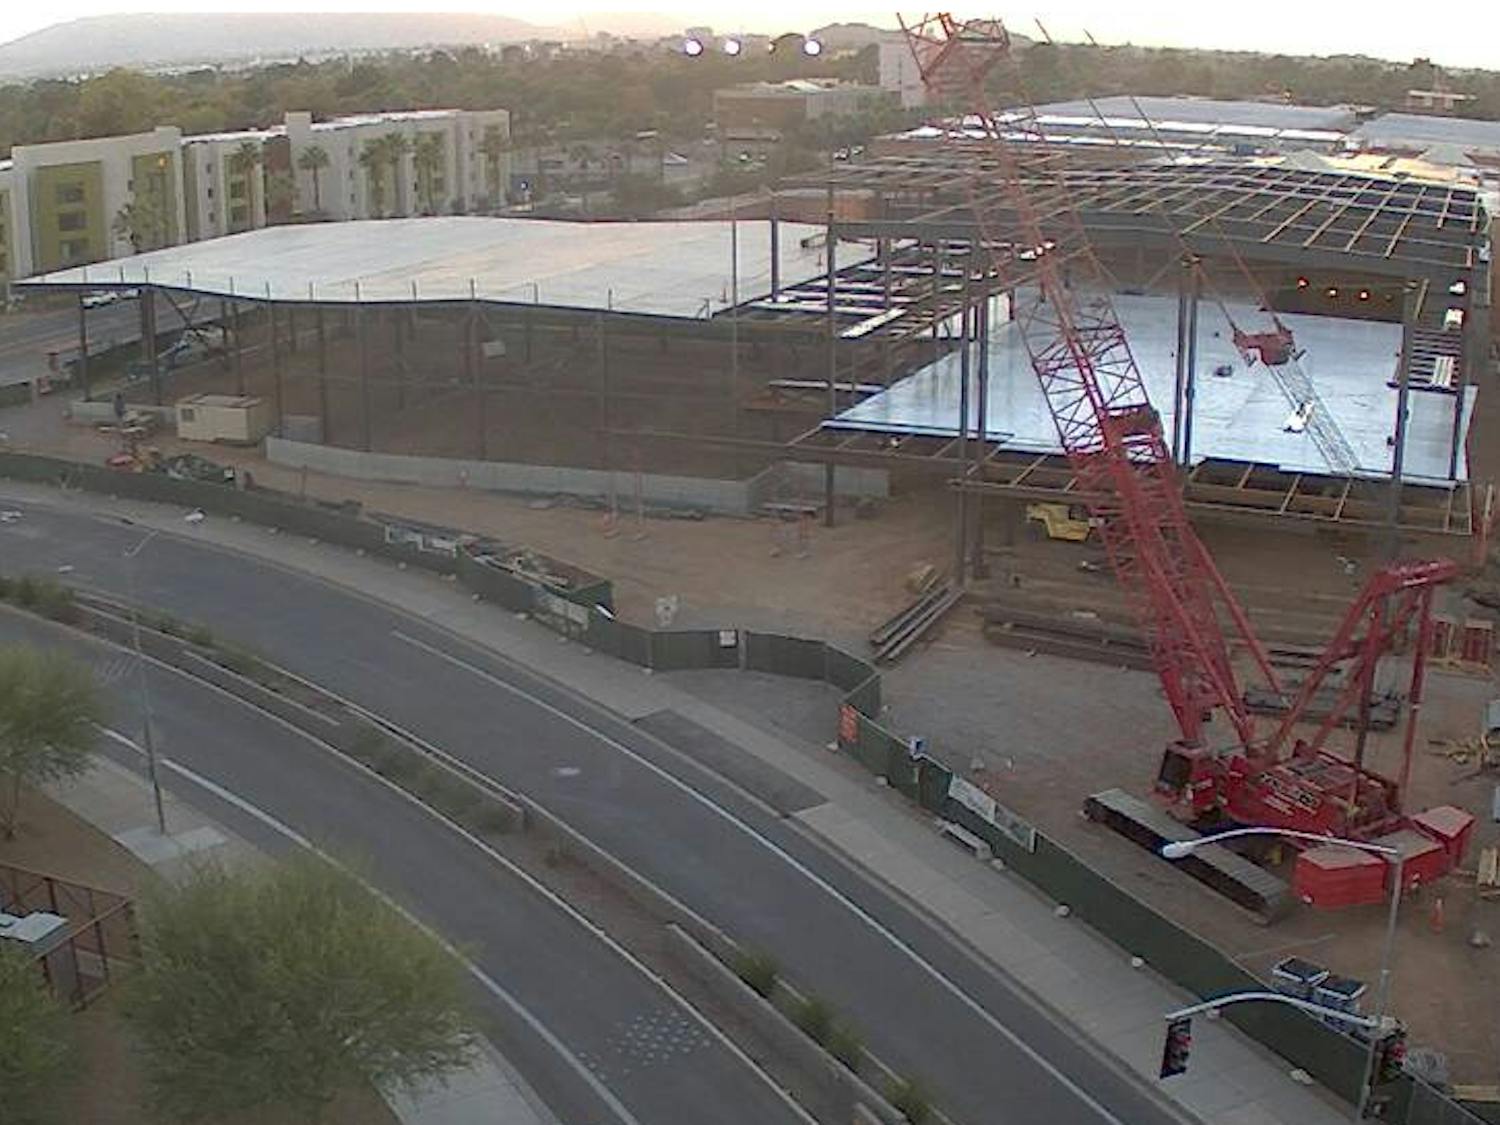 The Tempe campus Student Rec Center will be expanded to accomodate . Photo by Evan Triantafilidis.